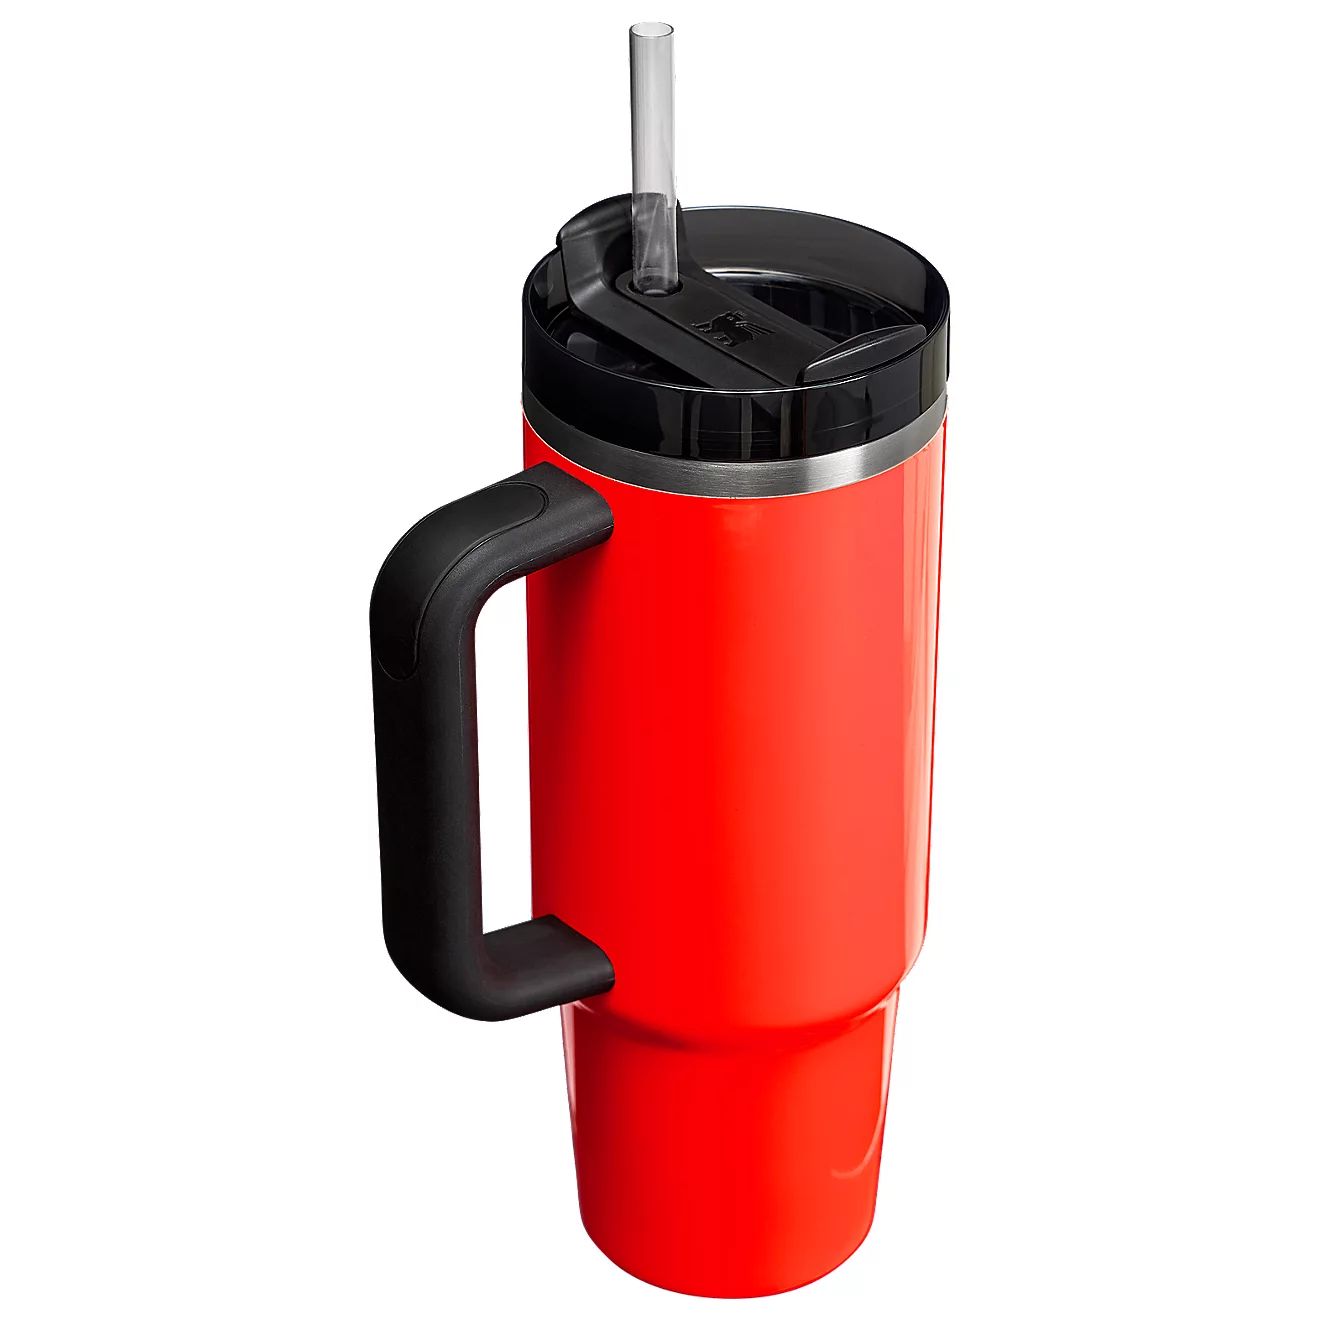 Stanley 40oz Adventure Quencher H2.0 FlowState Tumbler | Academy | Academy Sports + Outdoors